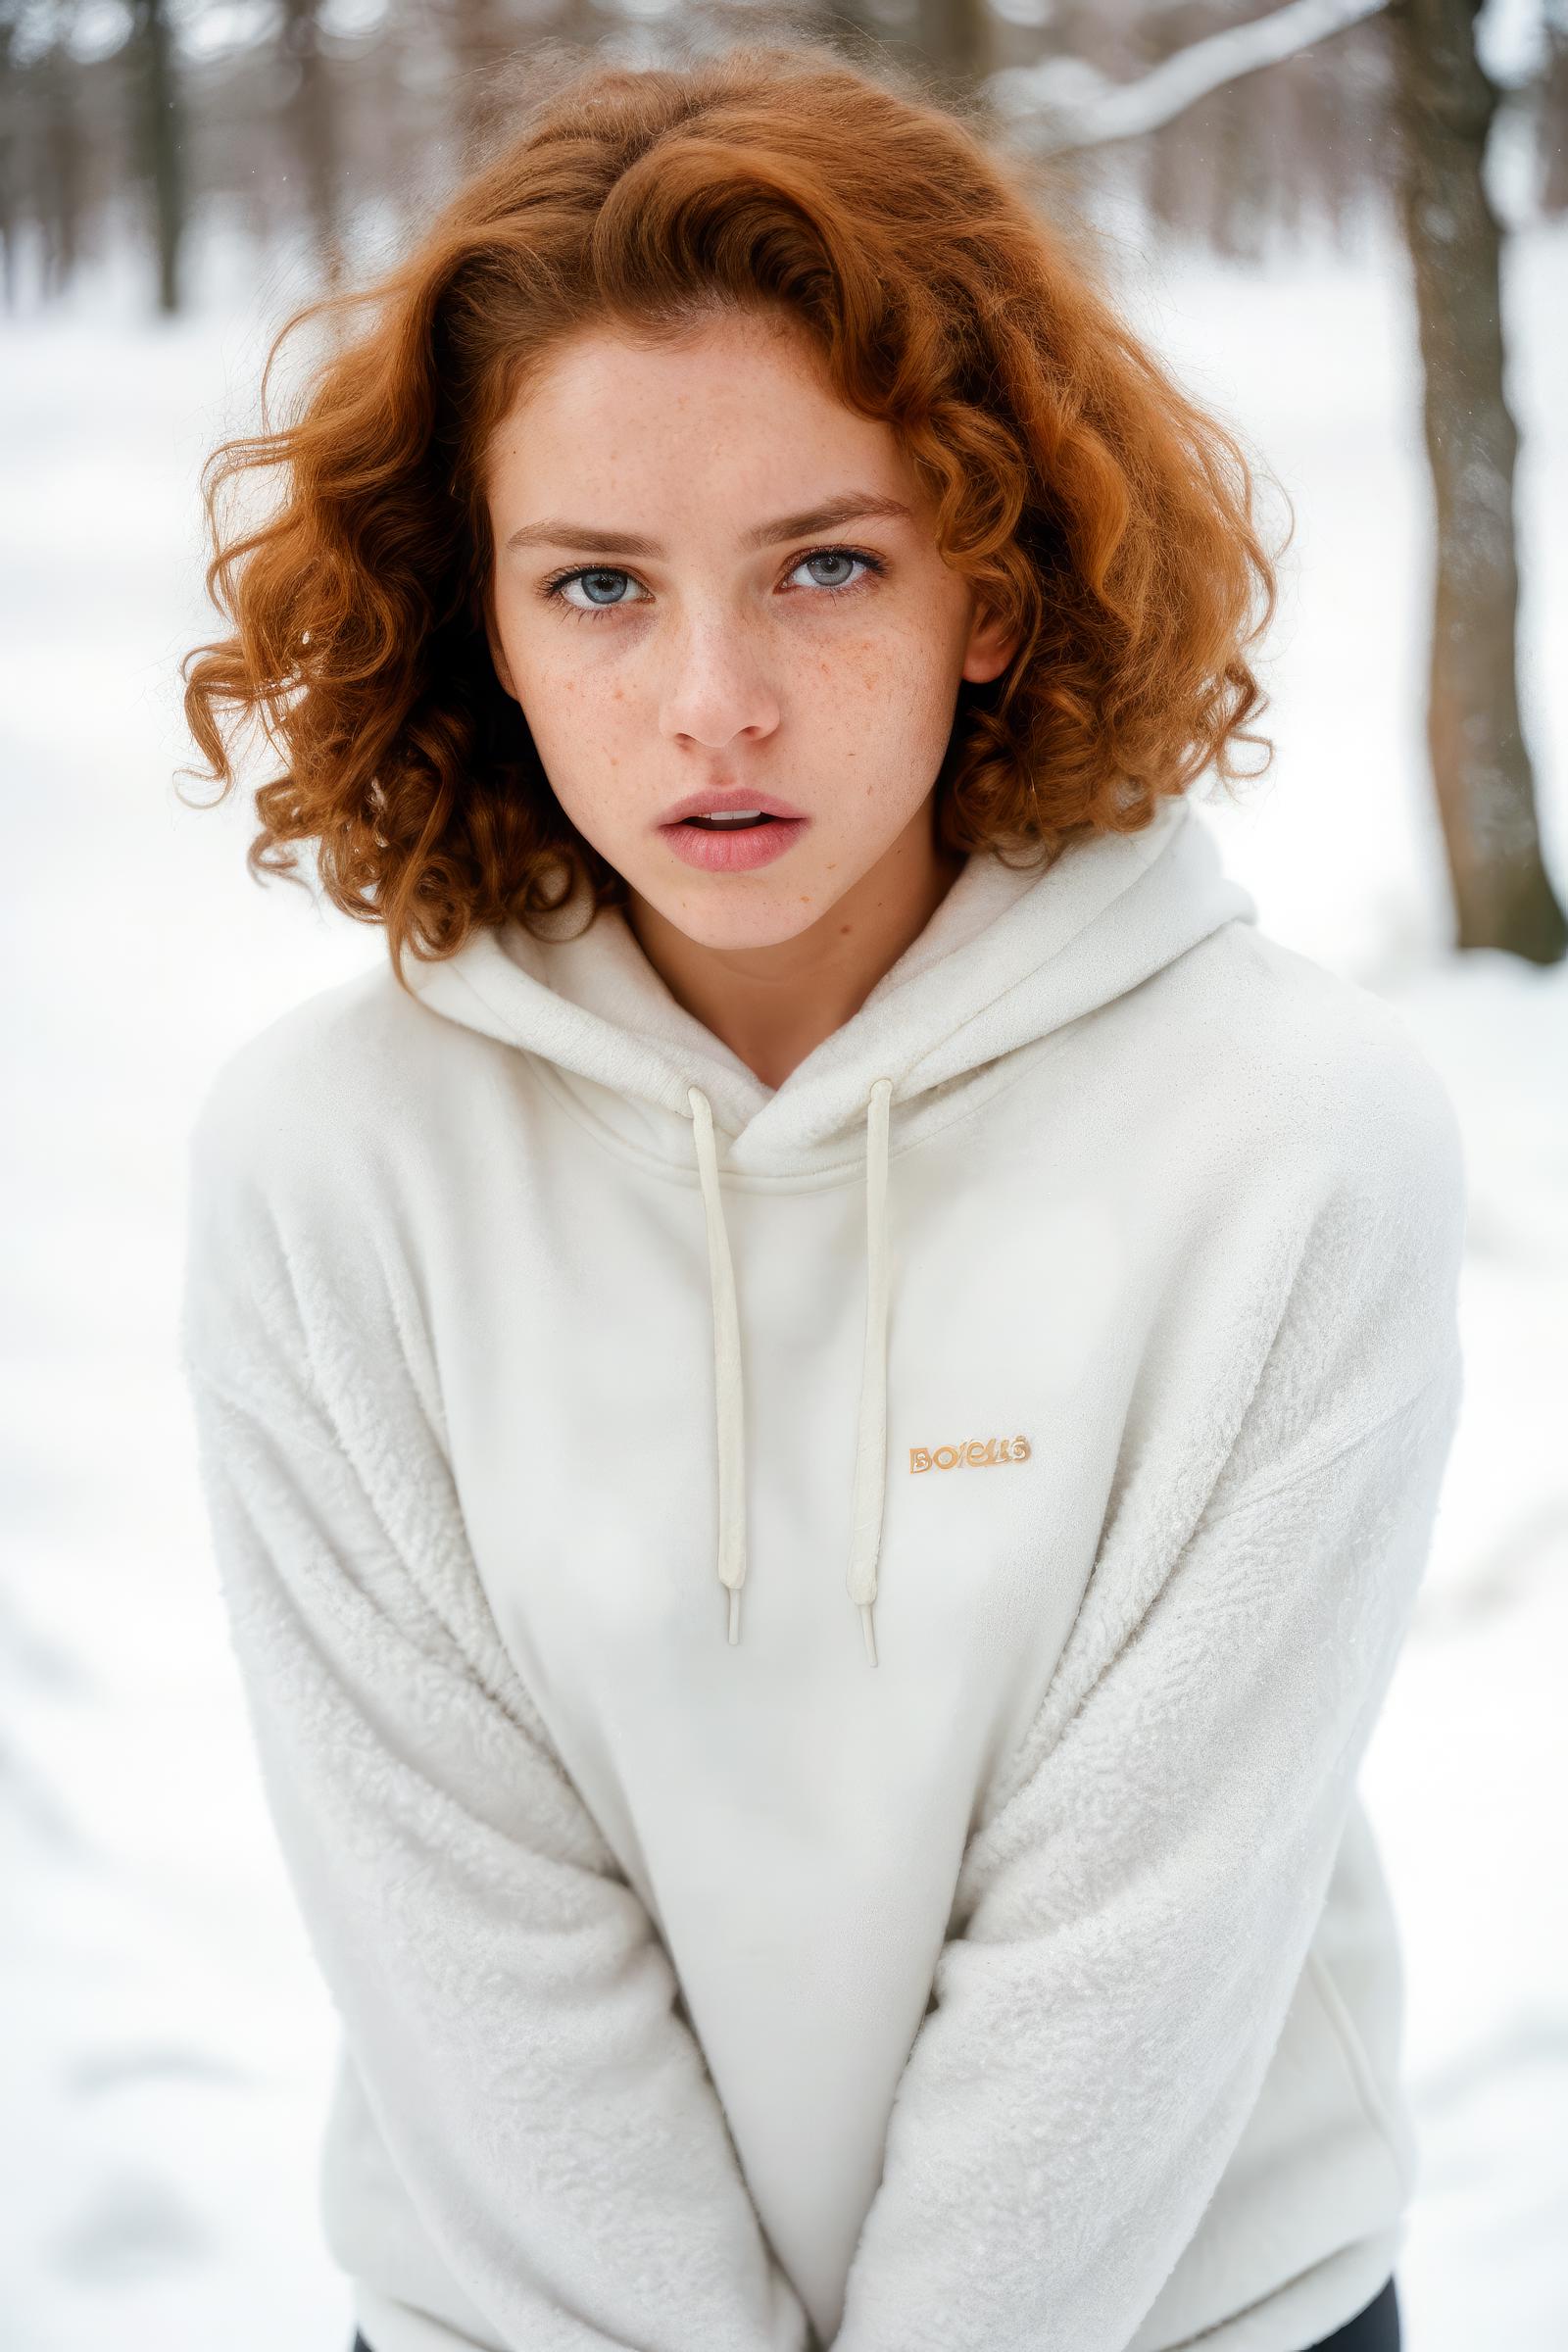 A close-up image of a red-haired girl wearing a white sweatshirt with a gold logo.